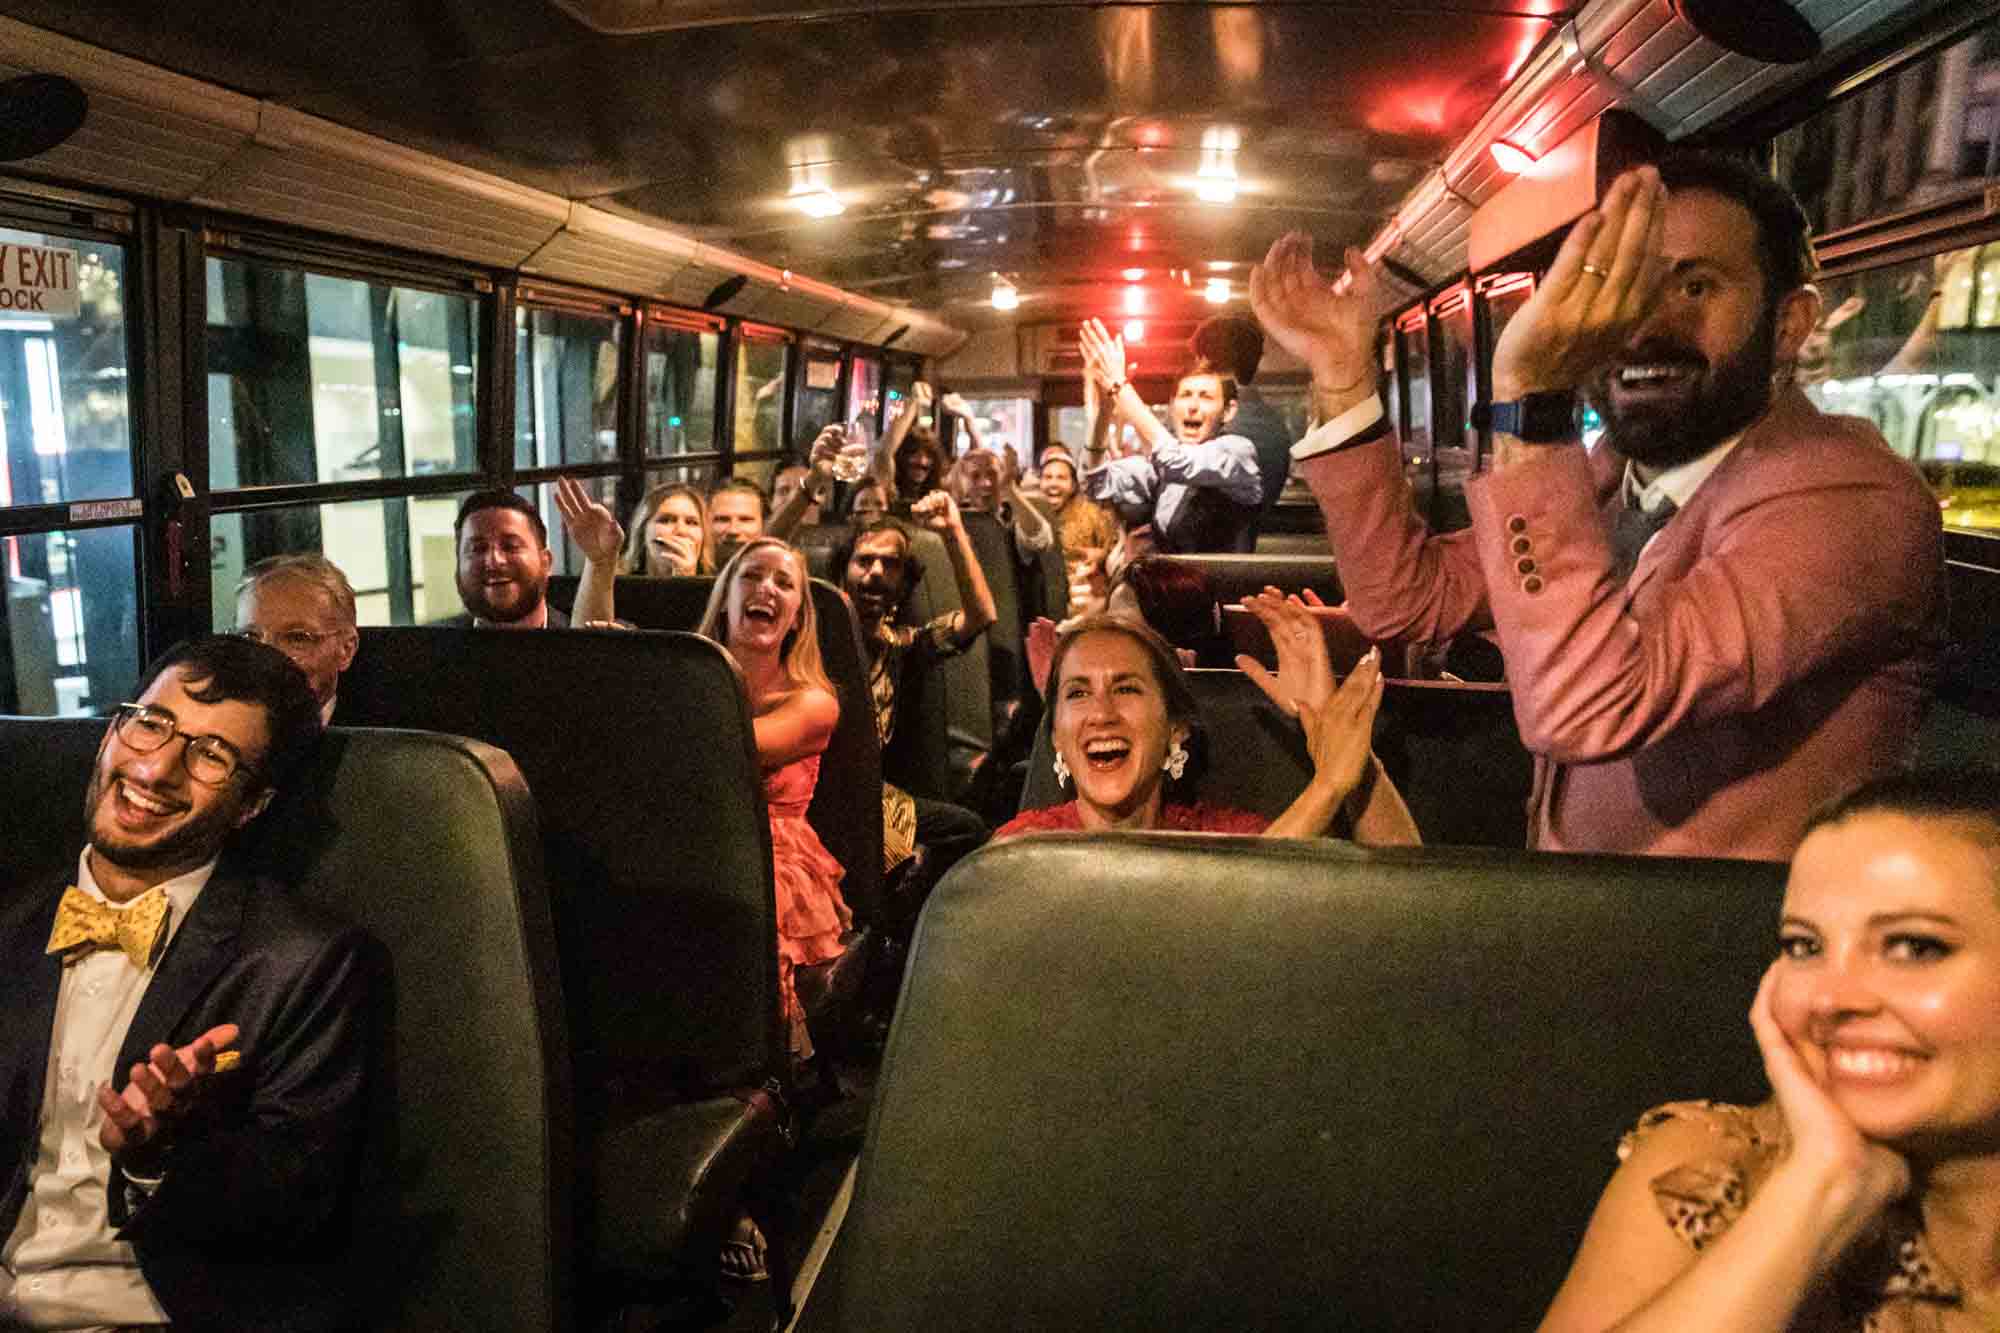 Guests on school bus clapping for bride and groom